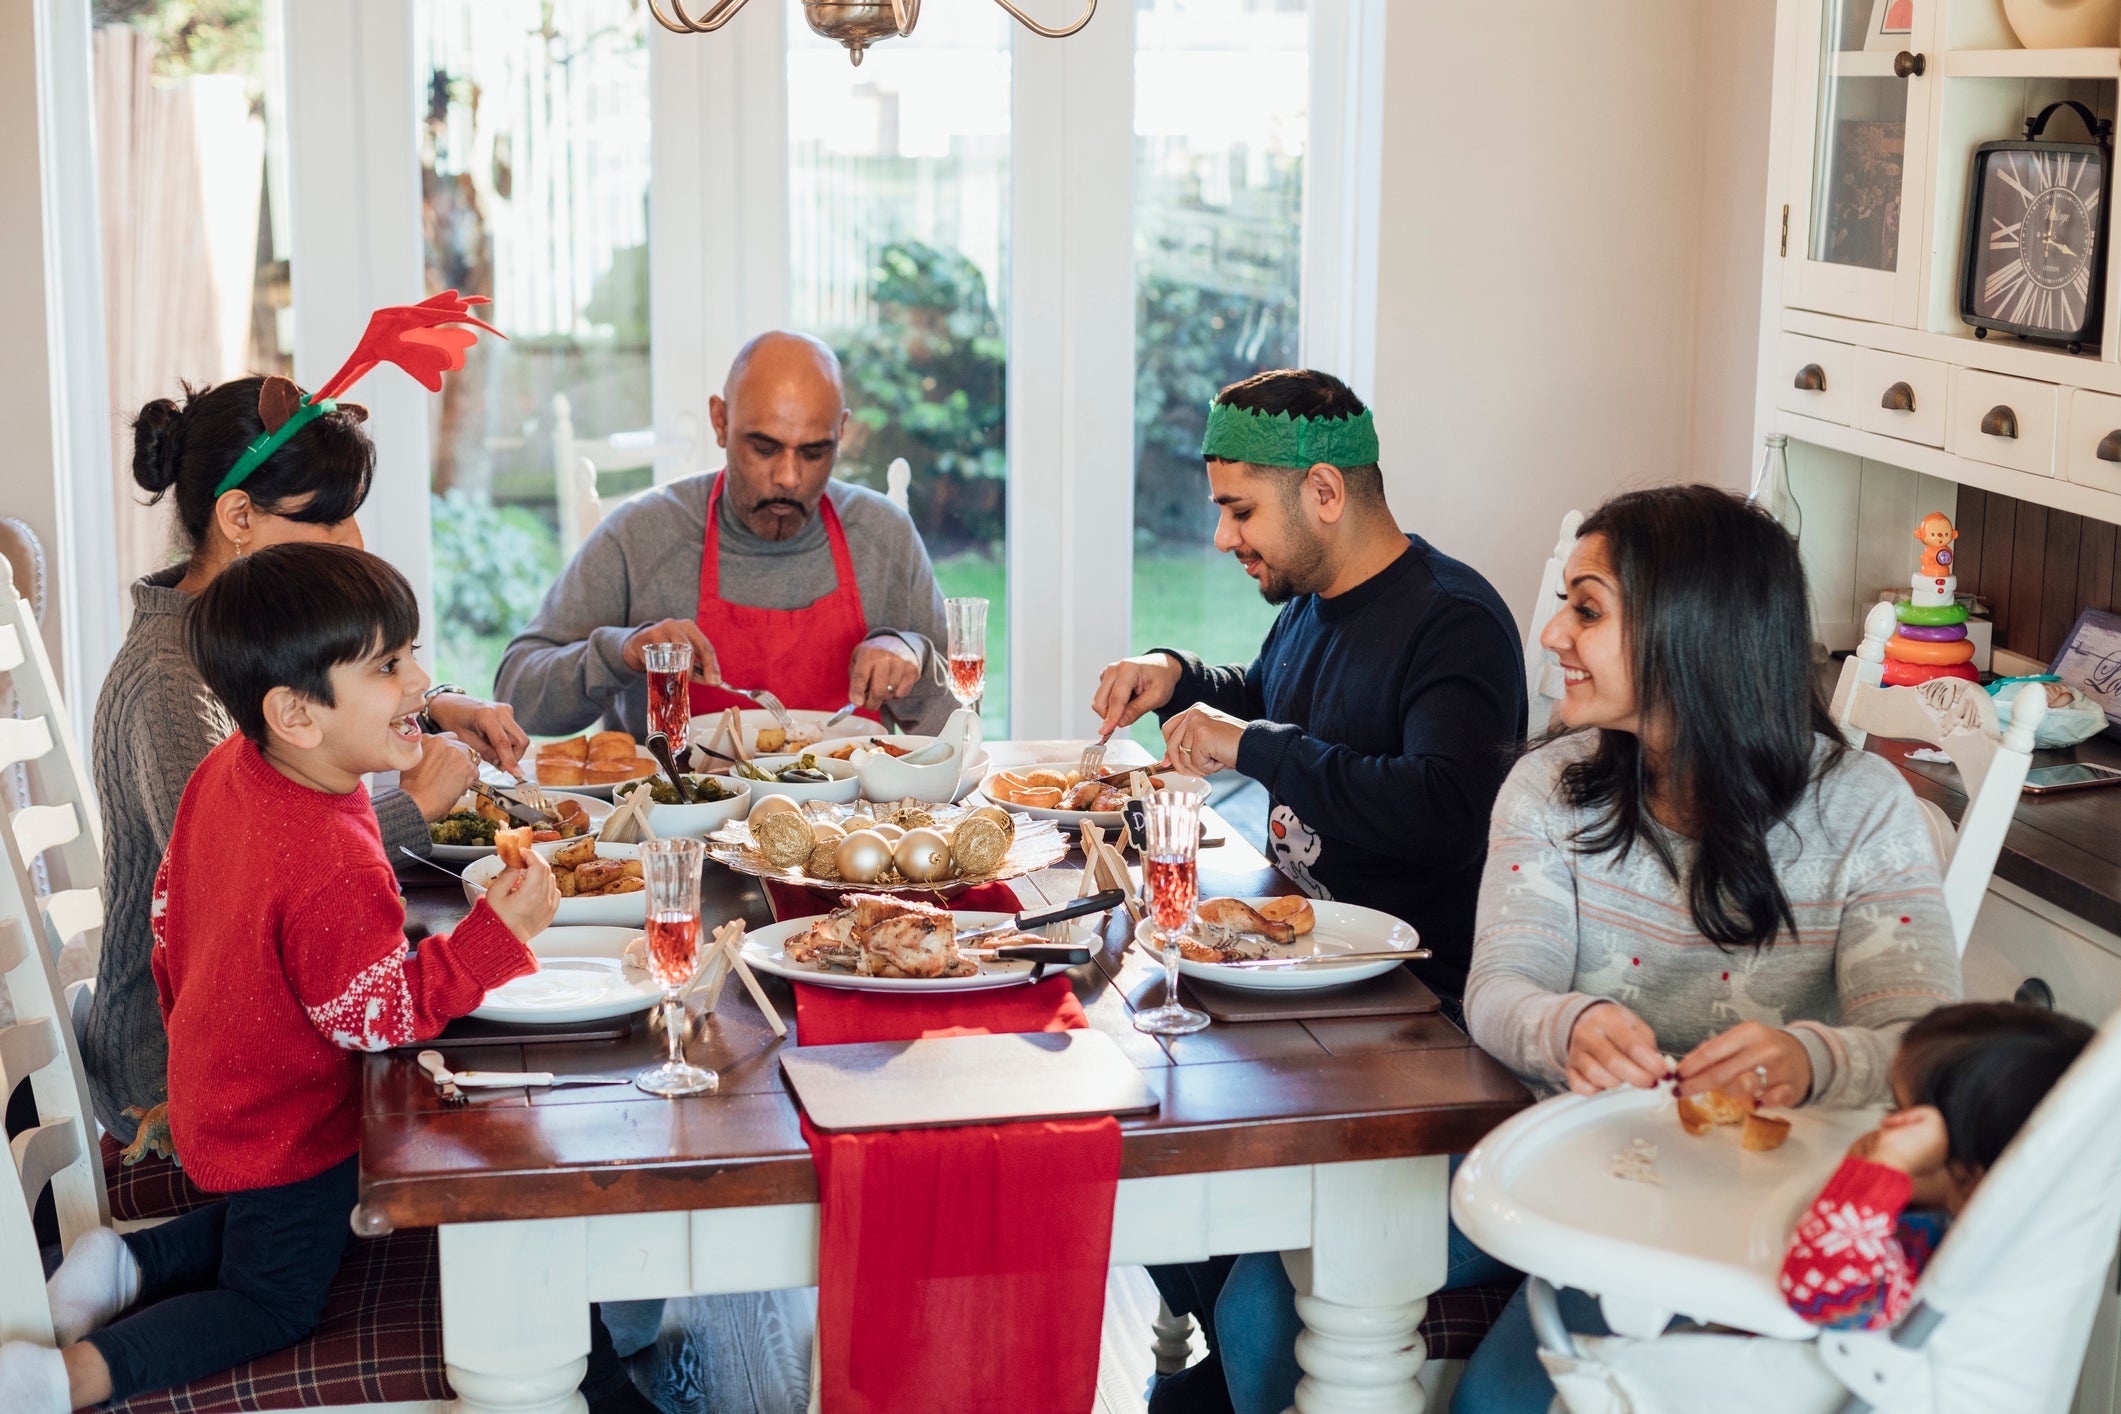 ‘Some Muslims take part in Christmas celebrations, others choose not to — how we choose to spend the day is a personal decision’